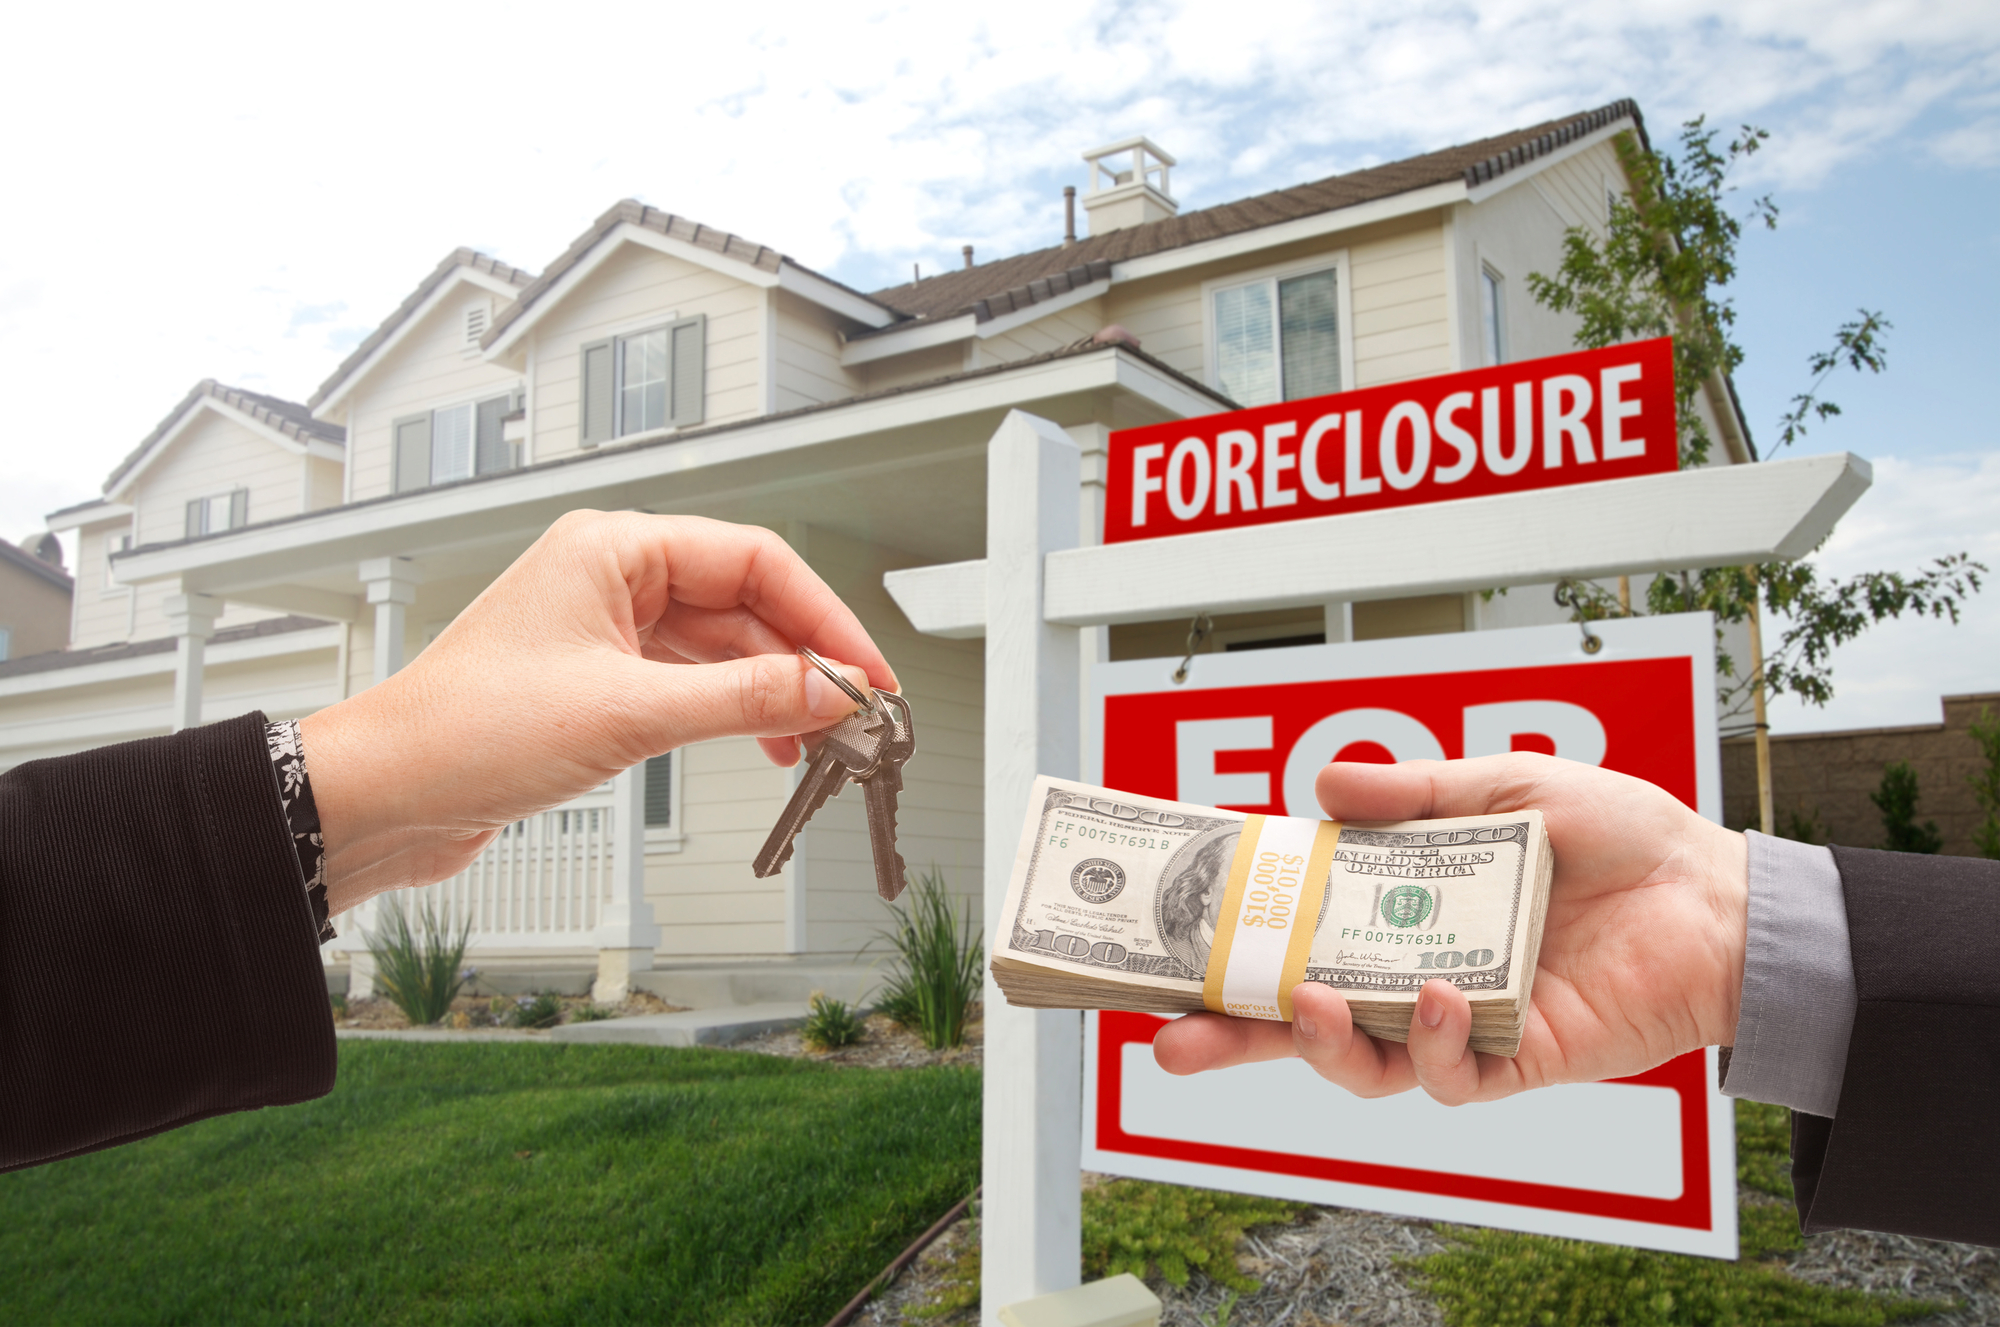 A person handing a person money in front of a house with a foreclosed sign.